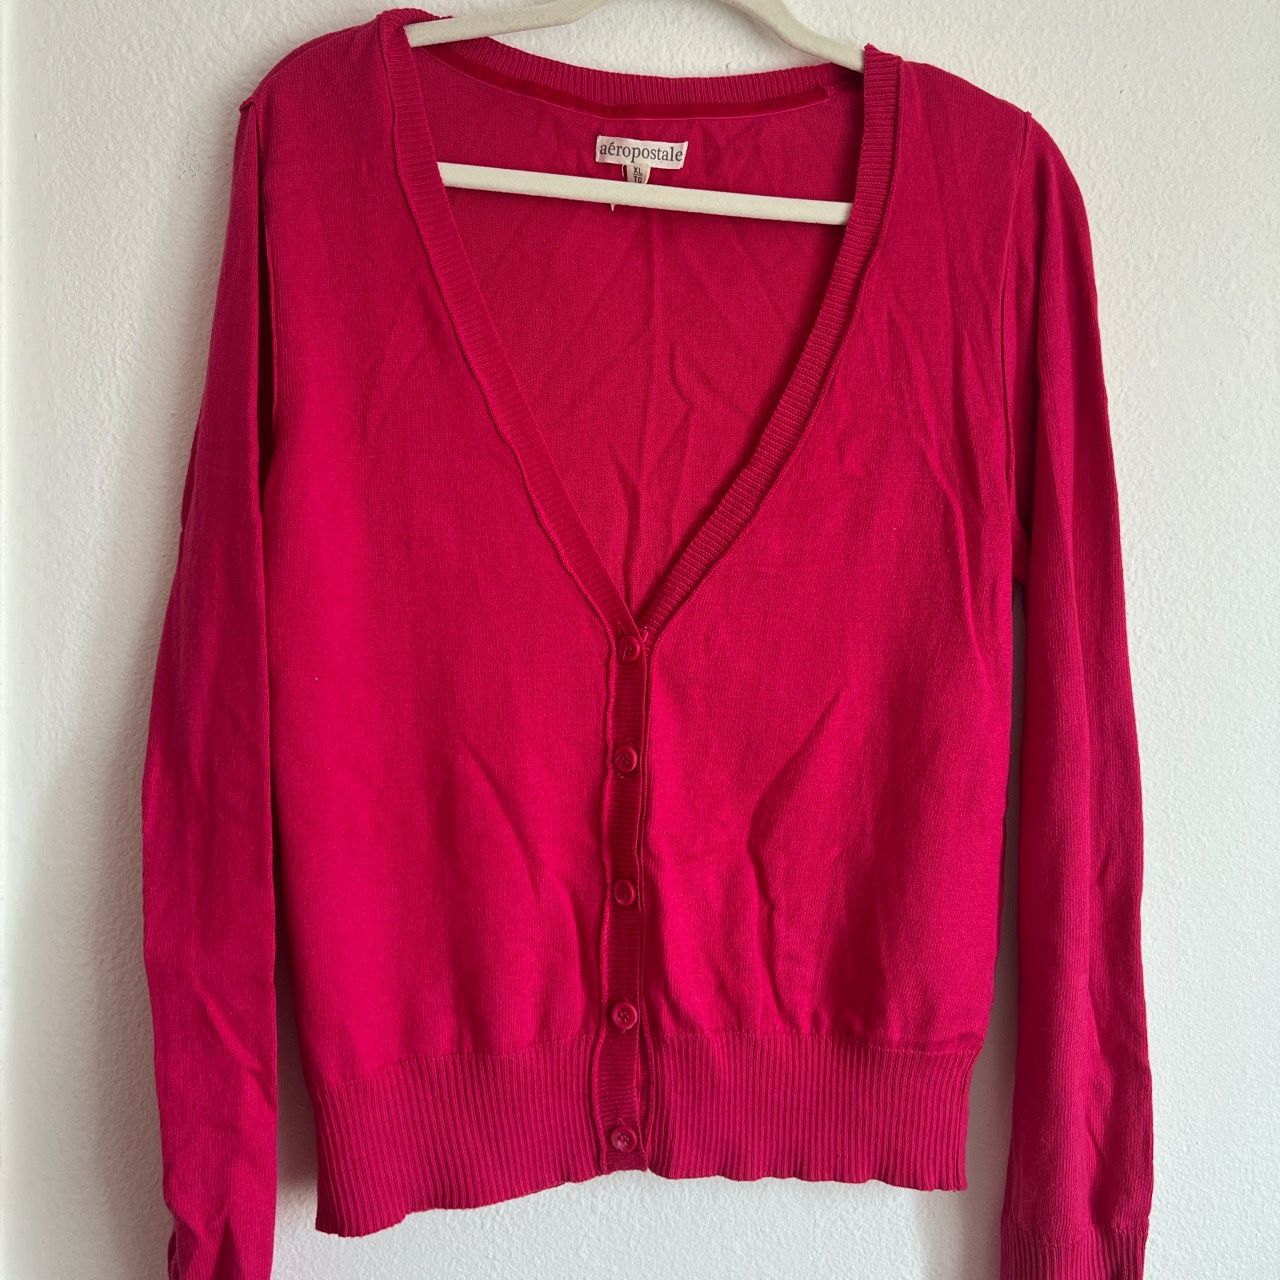 Aeropostale Pink Buttoned Cardigan